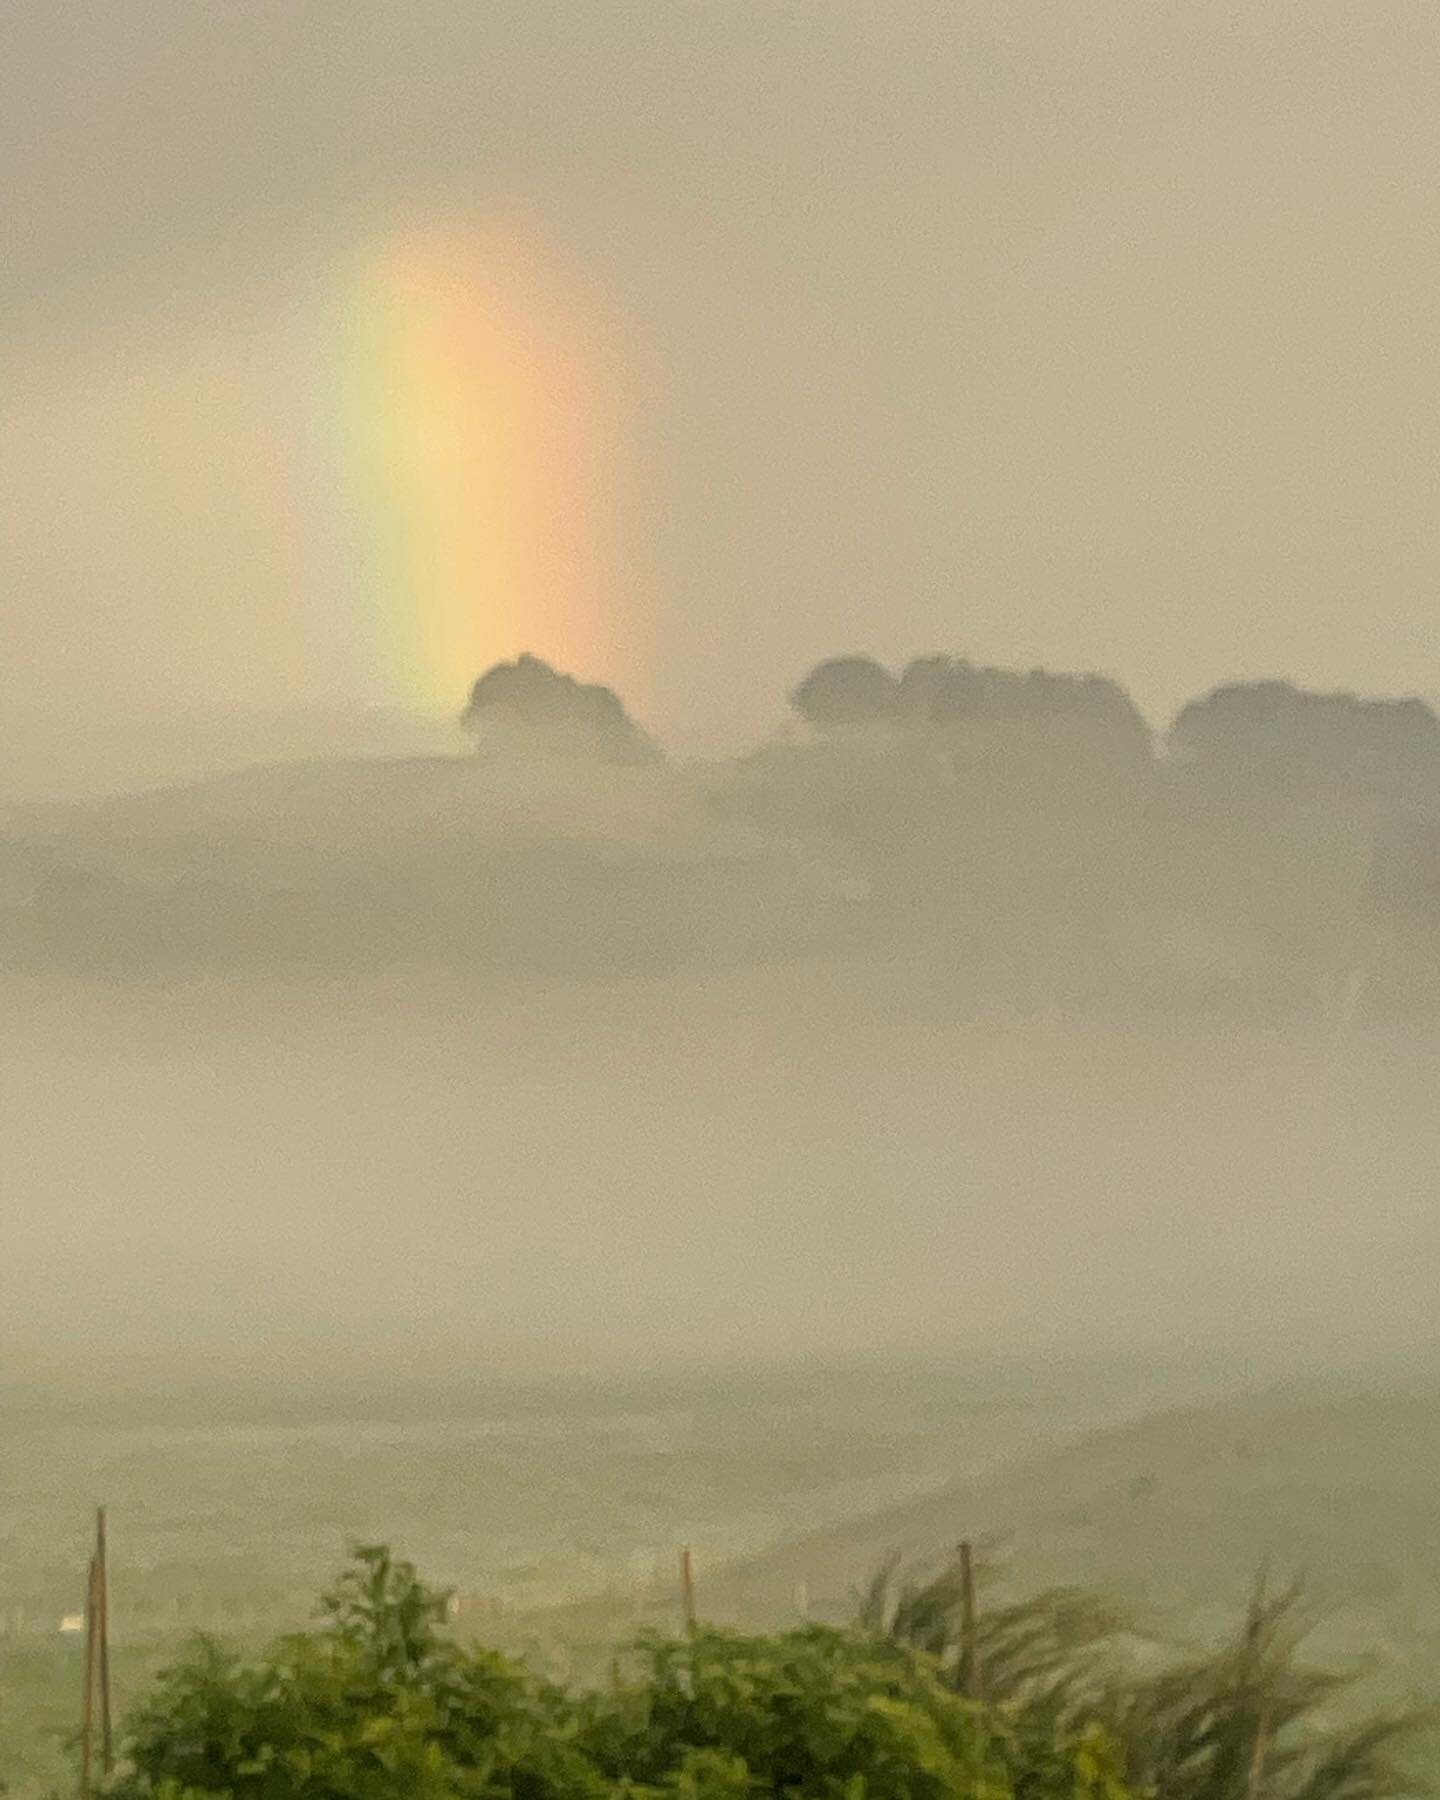 A stunning view this morning with a rainbow peaking through the fog.